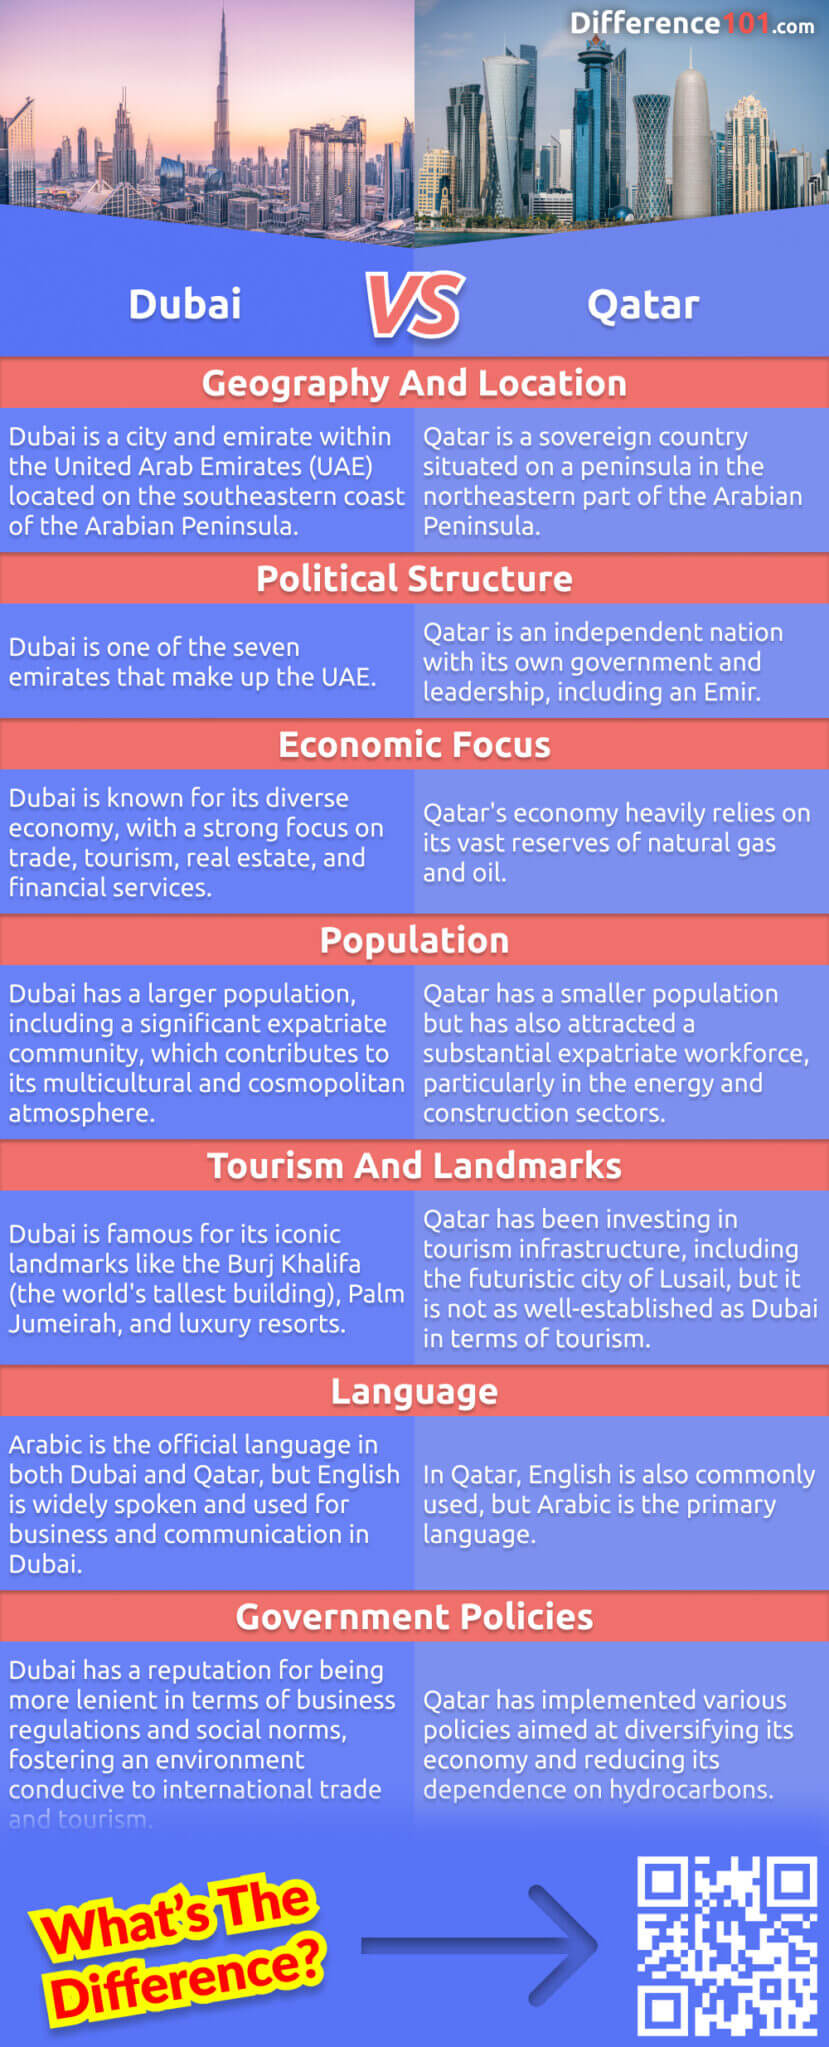 Discover the Gulf's gems: Dubai vs. Qatar. Delve into their unique identities, economies, and cultures. From Dubai's glitzy skyscrapers to Qatar's rich history, explore the distinctions that define these Middle Eastern powerhouses.